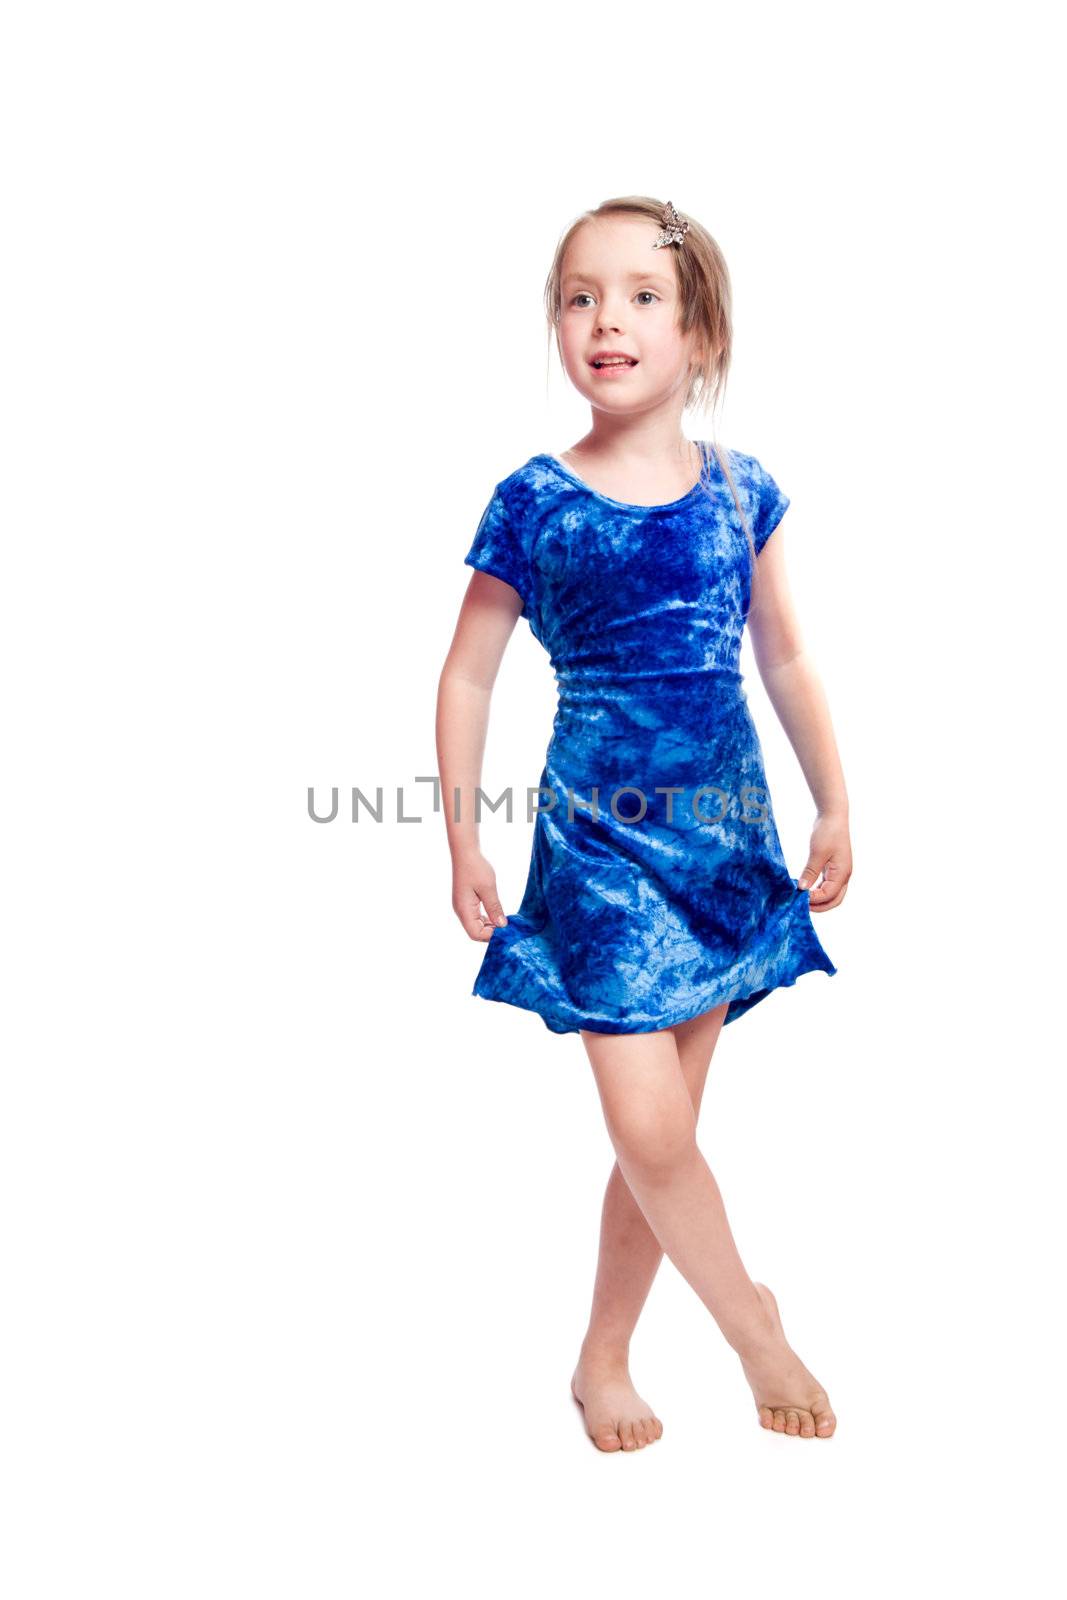 Dancing little girl wearing blue dress isolated on white